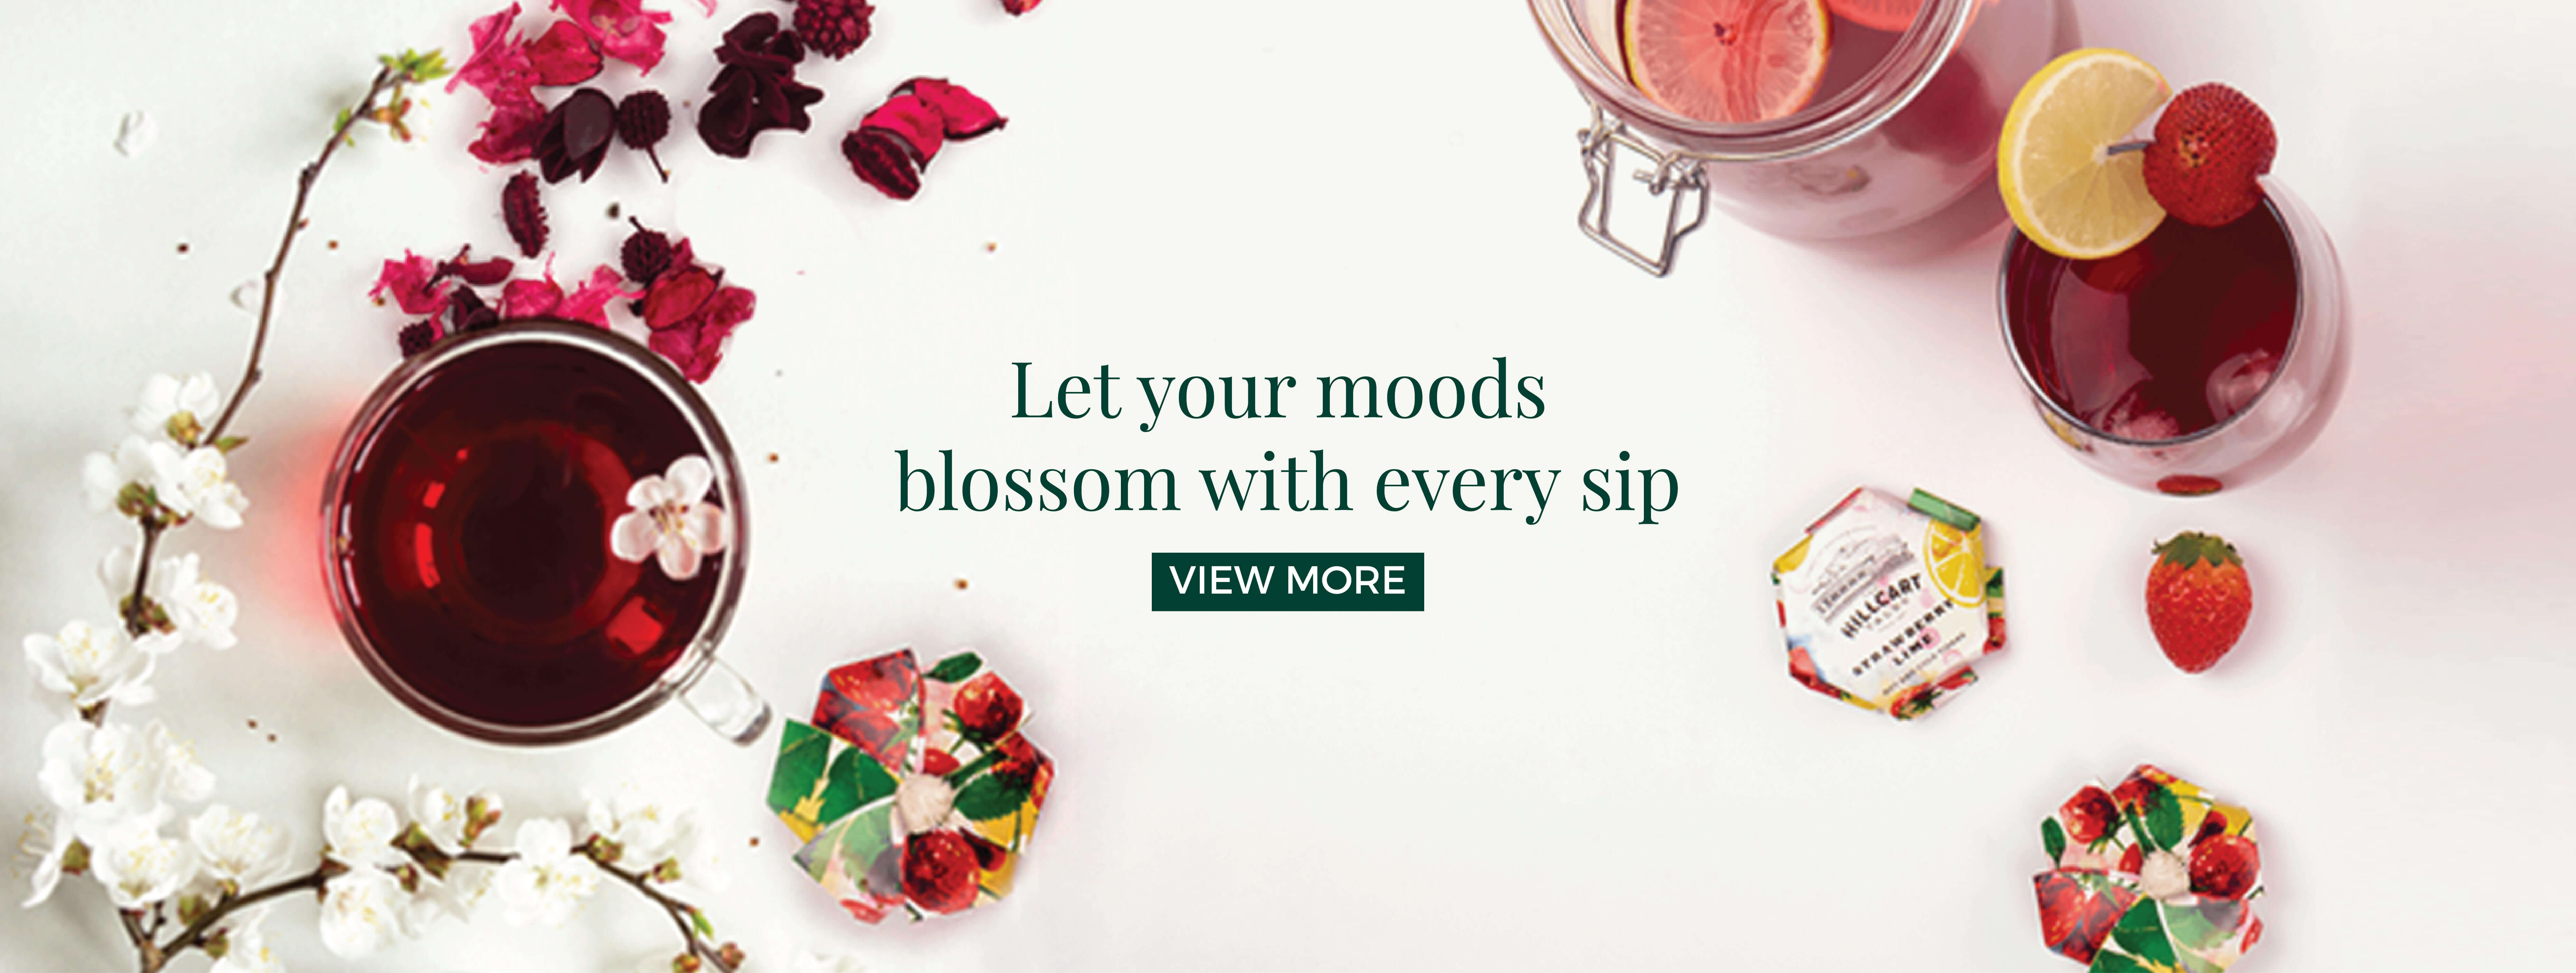 let your moods blossom with every sip